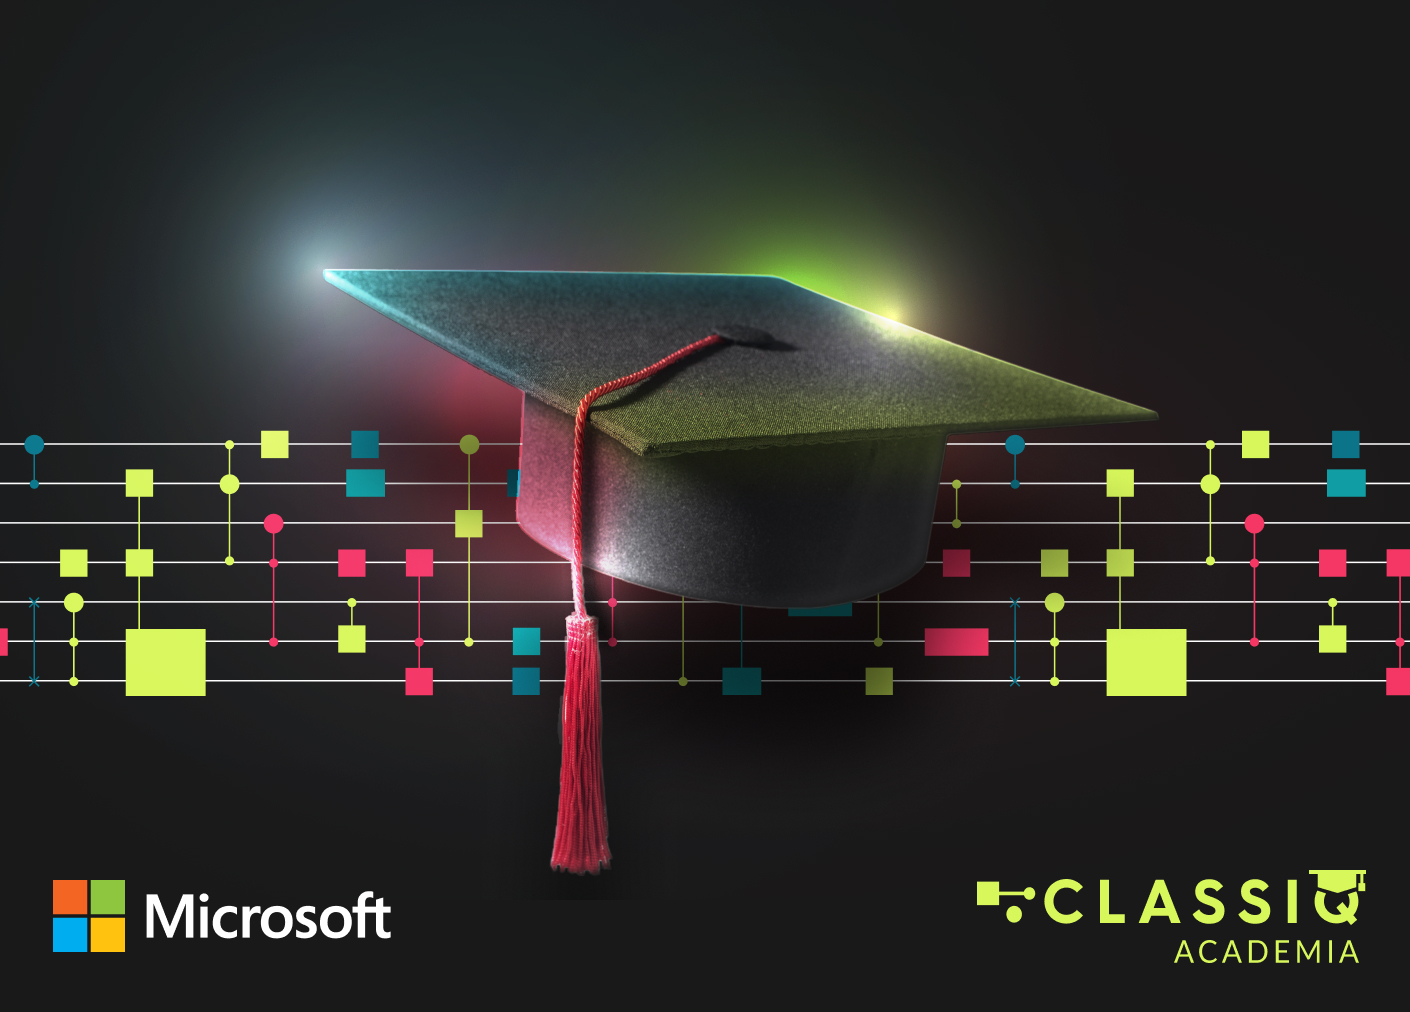 Microsoft Partners With Classiq, An Israeli-Based Startup, To Provide Advanced Quantum Software To Researchers And Academic Institutions.